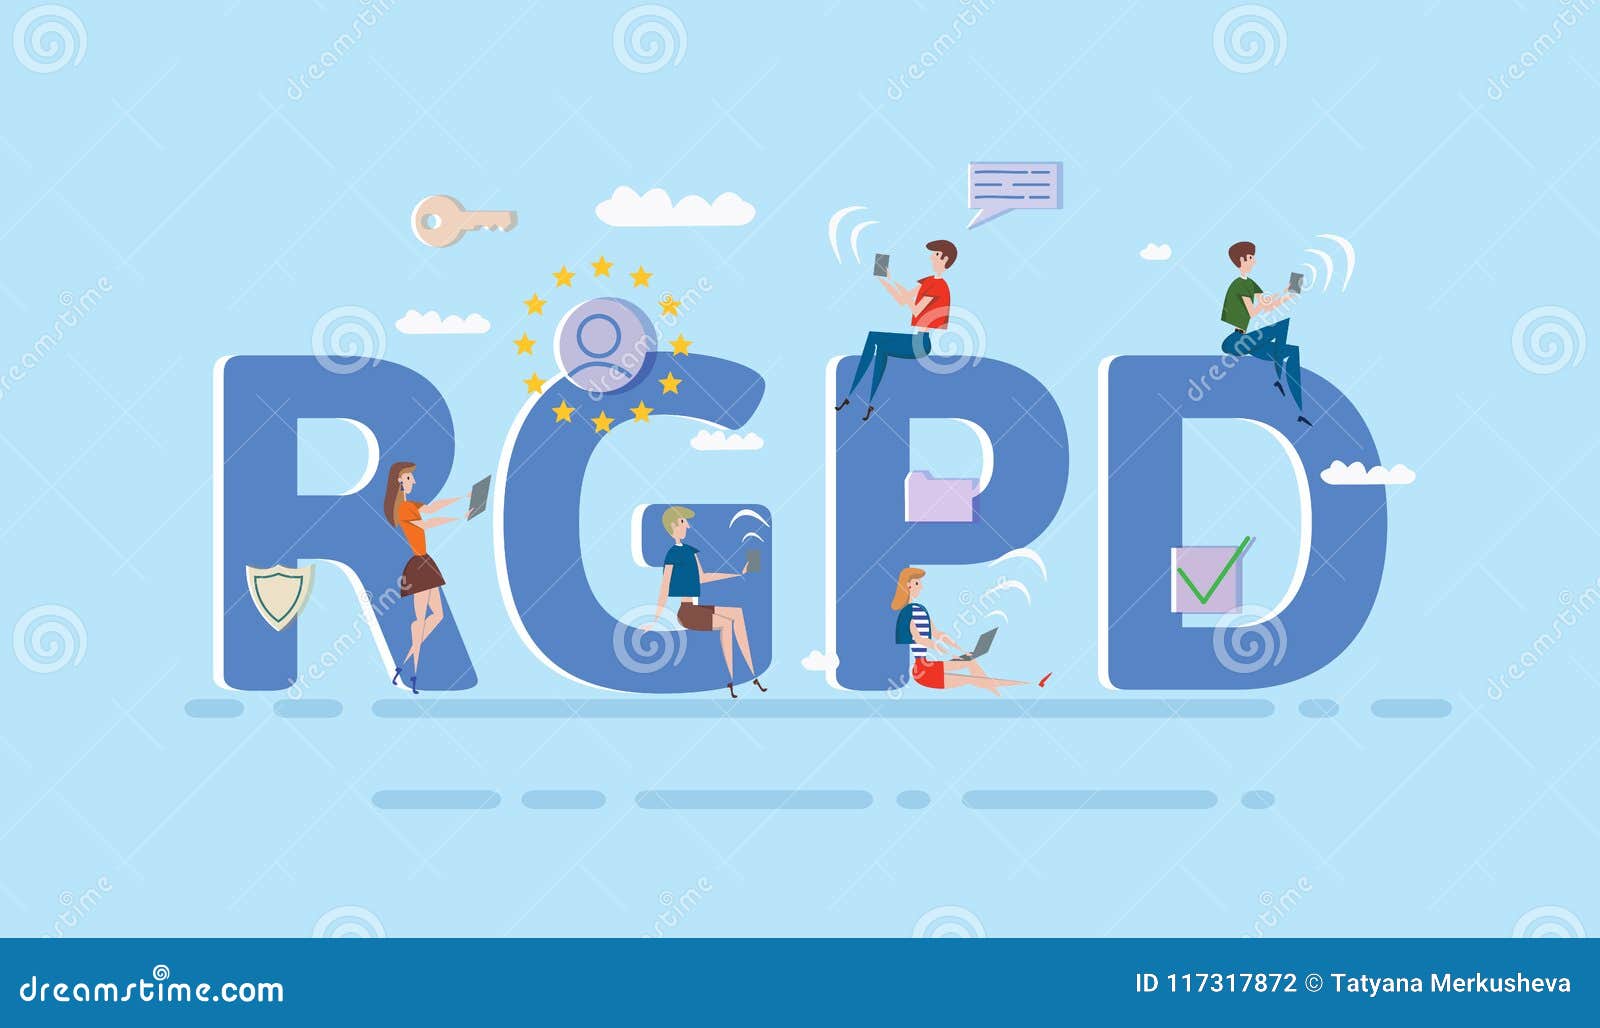 people using mobile gadgets and internet devices among big rgpd letters. gdpr, rgpd, dsgvo, dpo. concept 